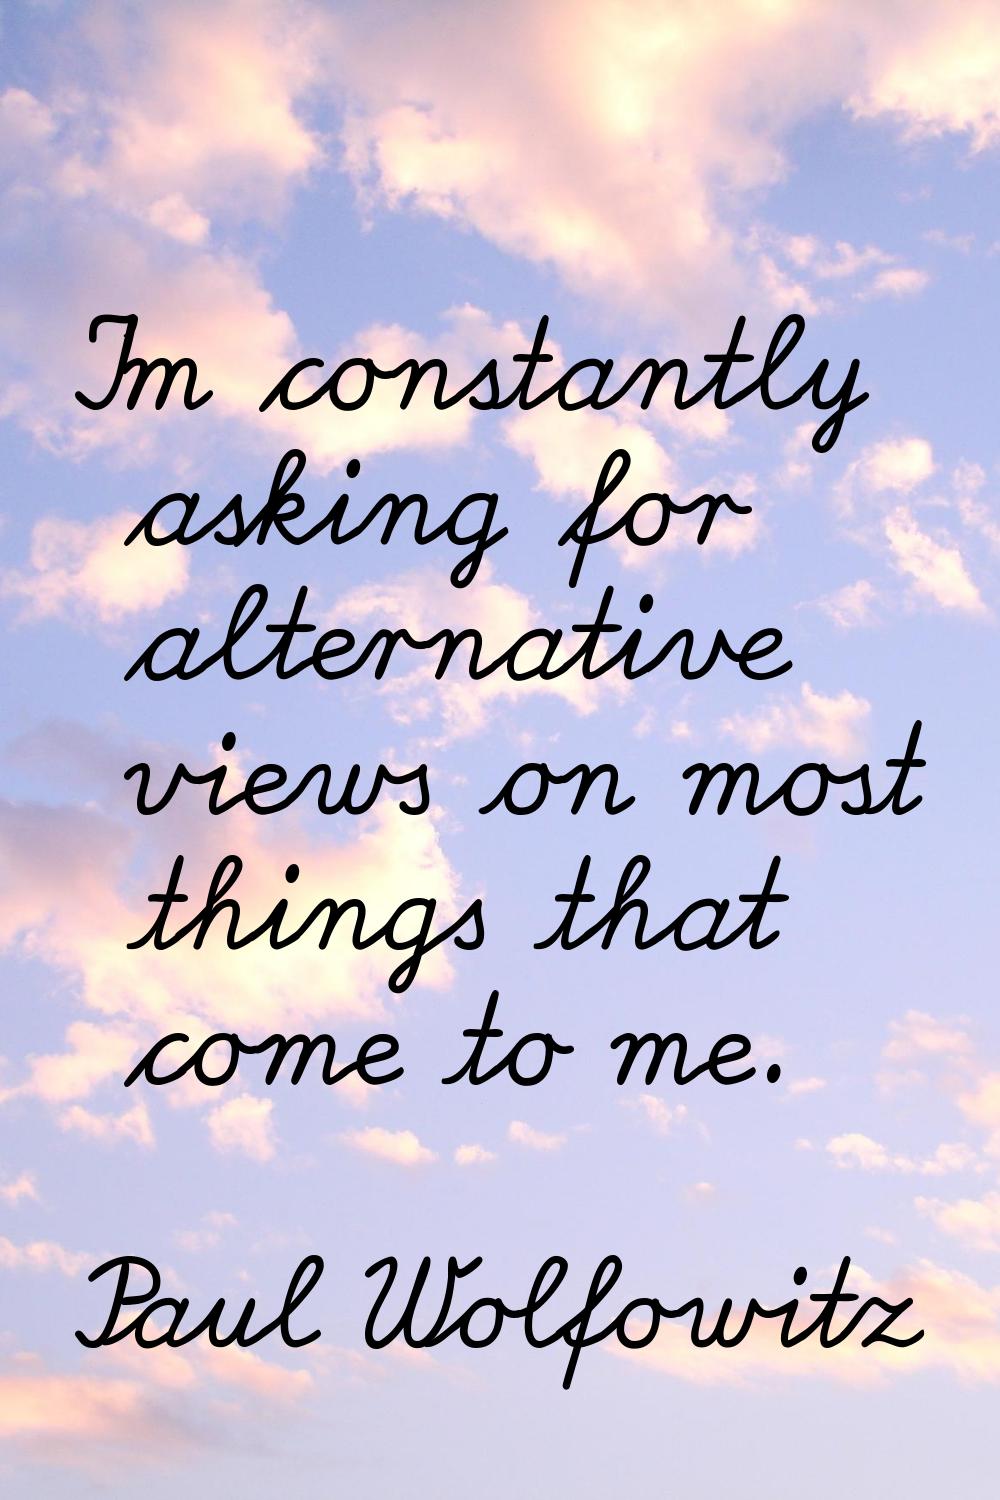 I'm constantly asking for alternative views on most things that come to me.